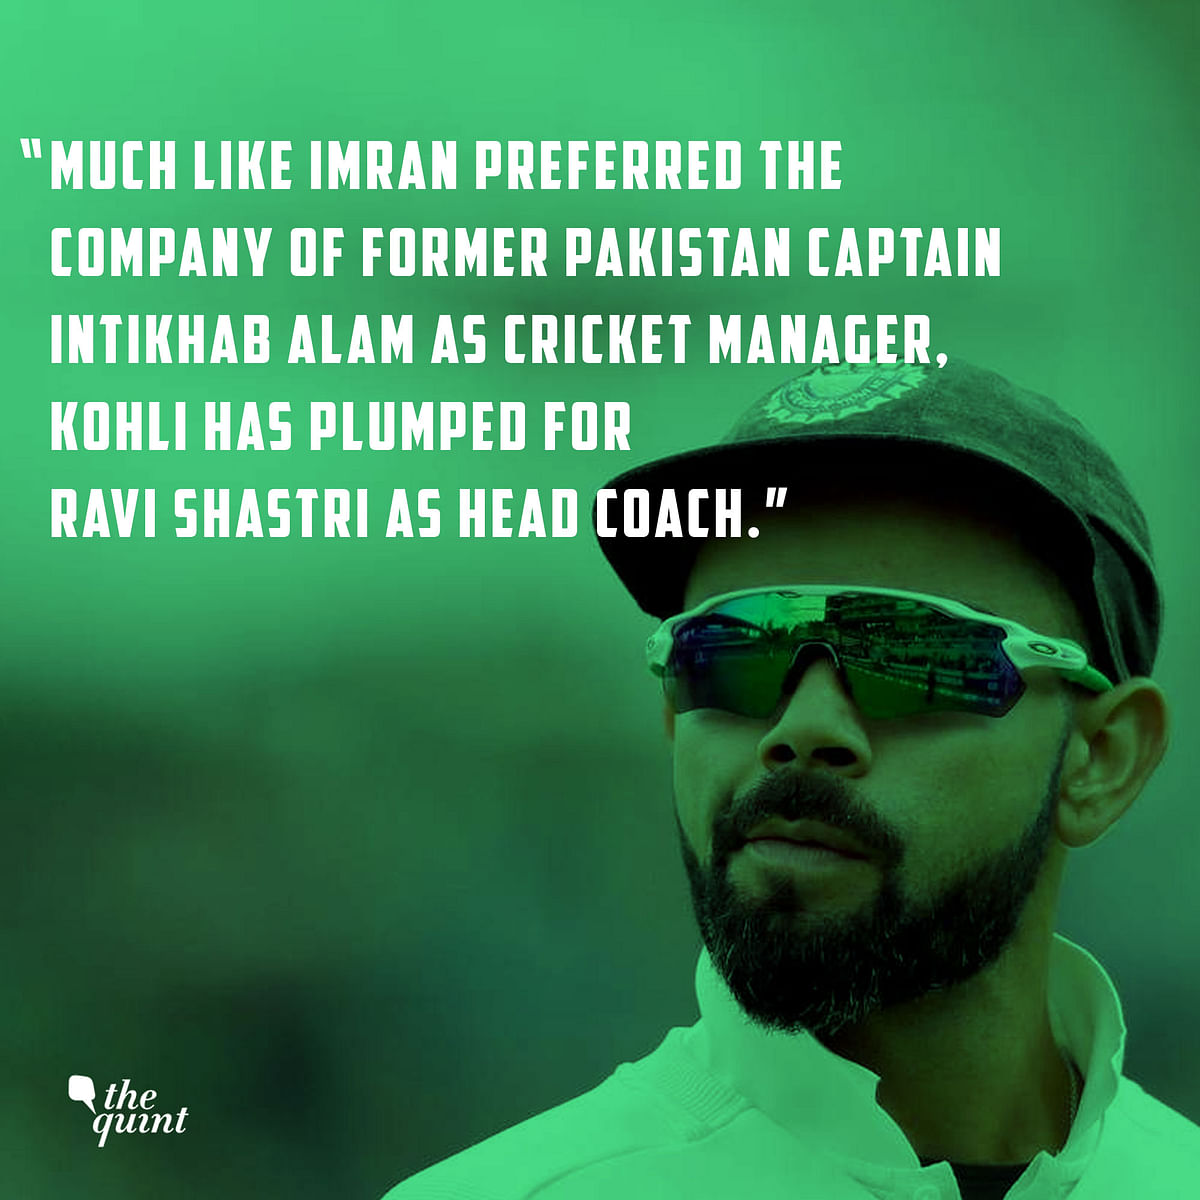 Without results overseas, should India make changes and replace Virat Kohli as the captain?